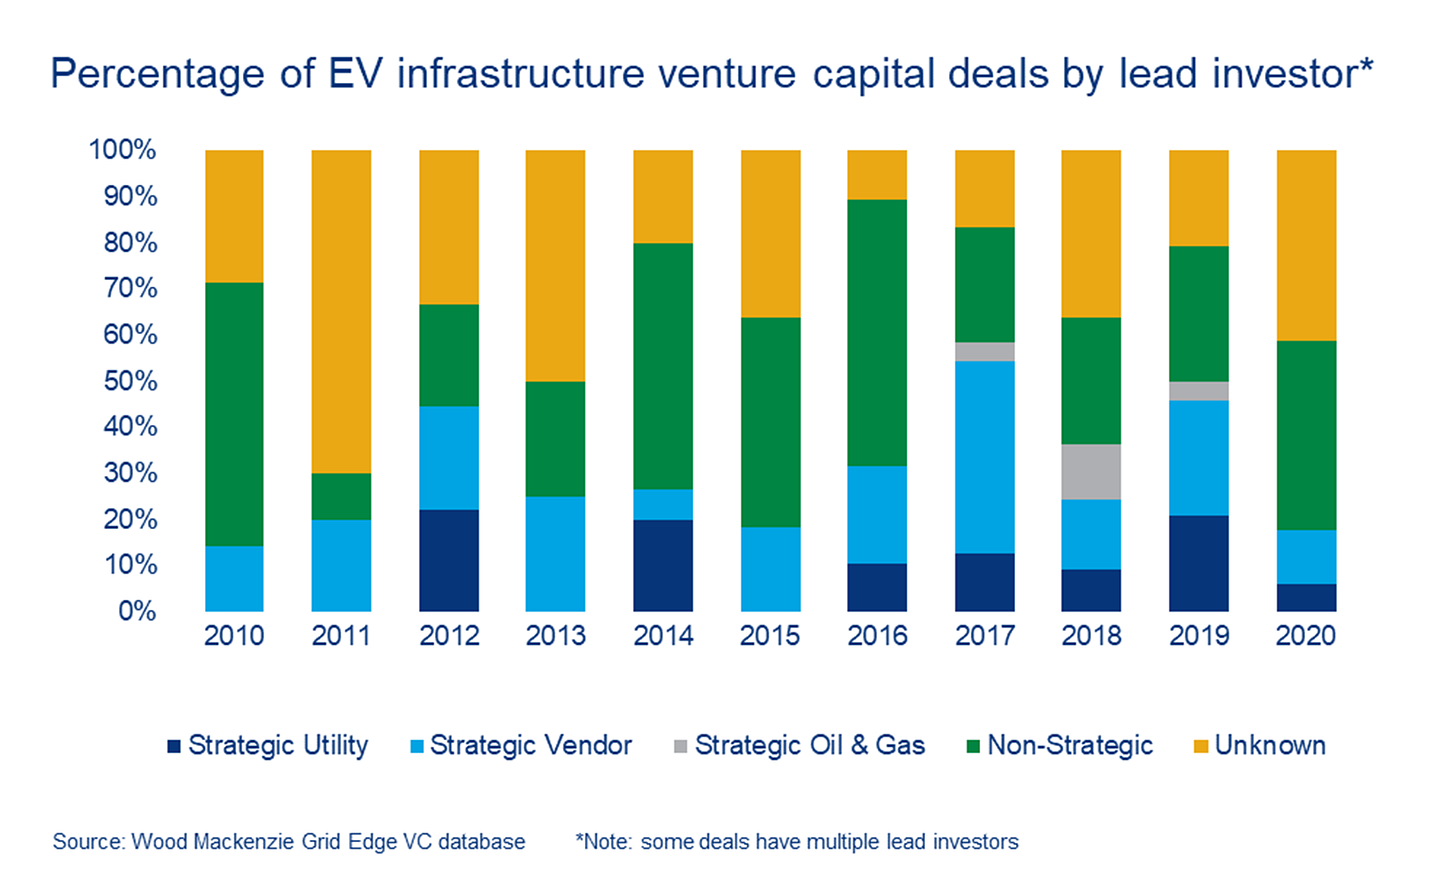 Chart shows the percentage of EV infrastructure VC deals by lead investor